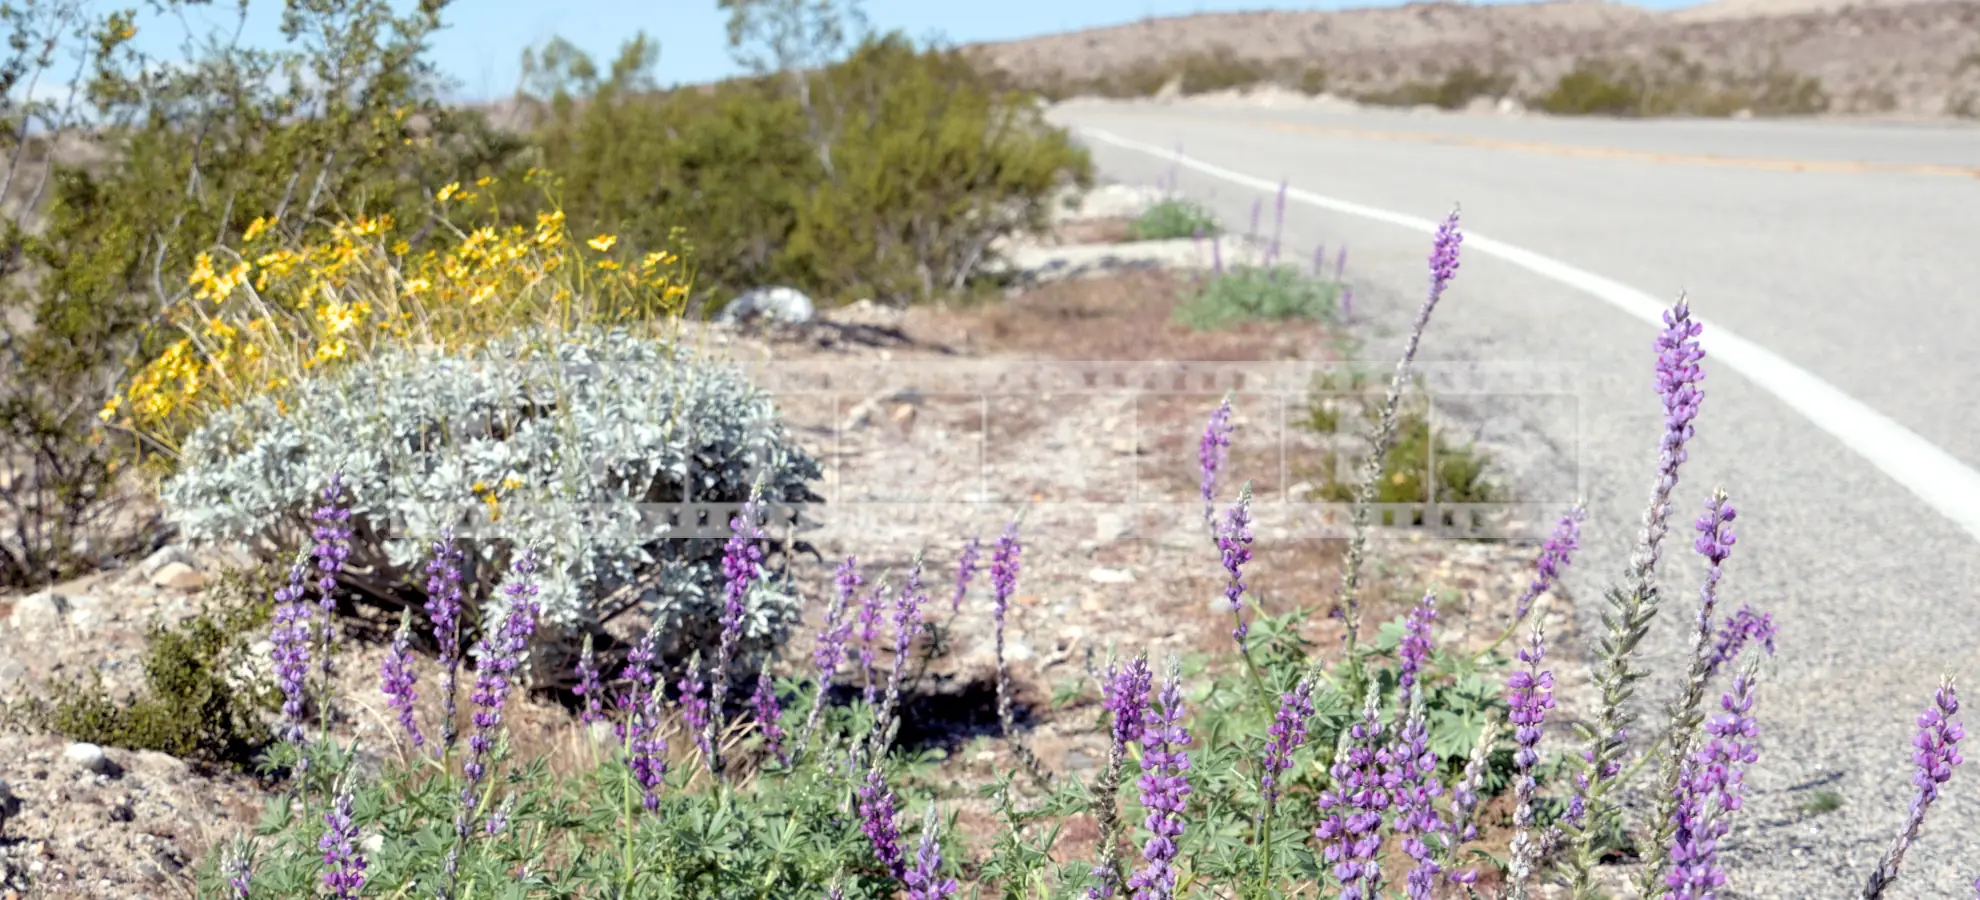 Colorful wildflowers by the road in Anza-Borrego State Park, California